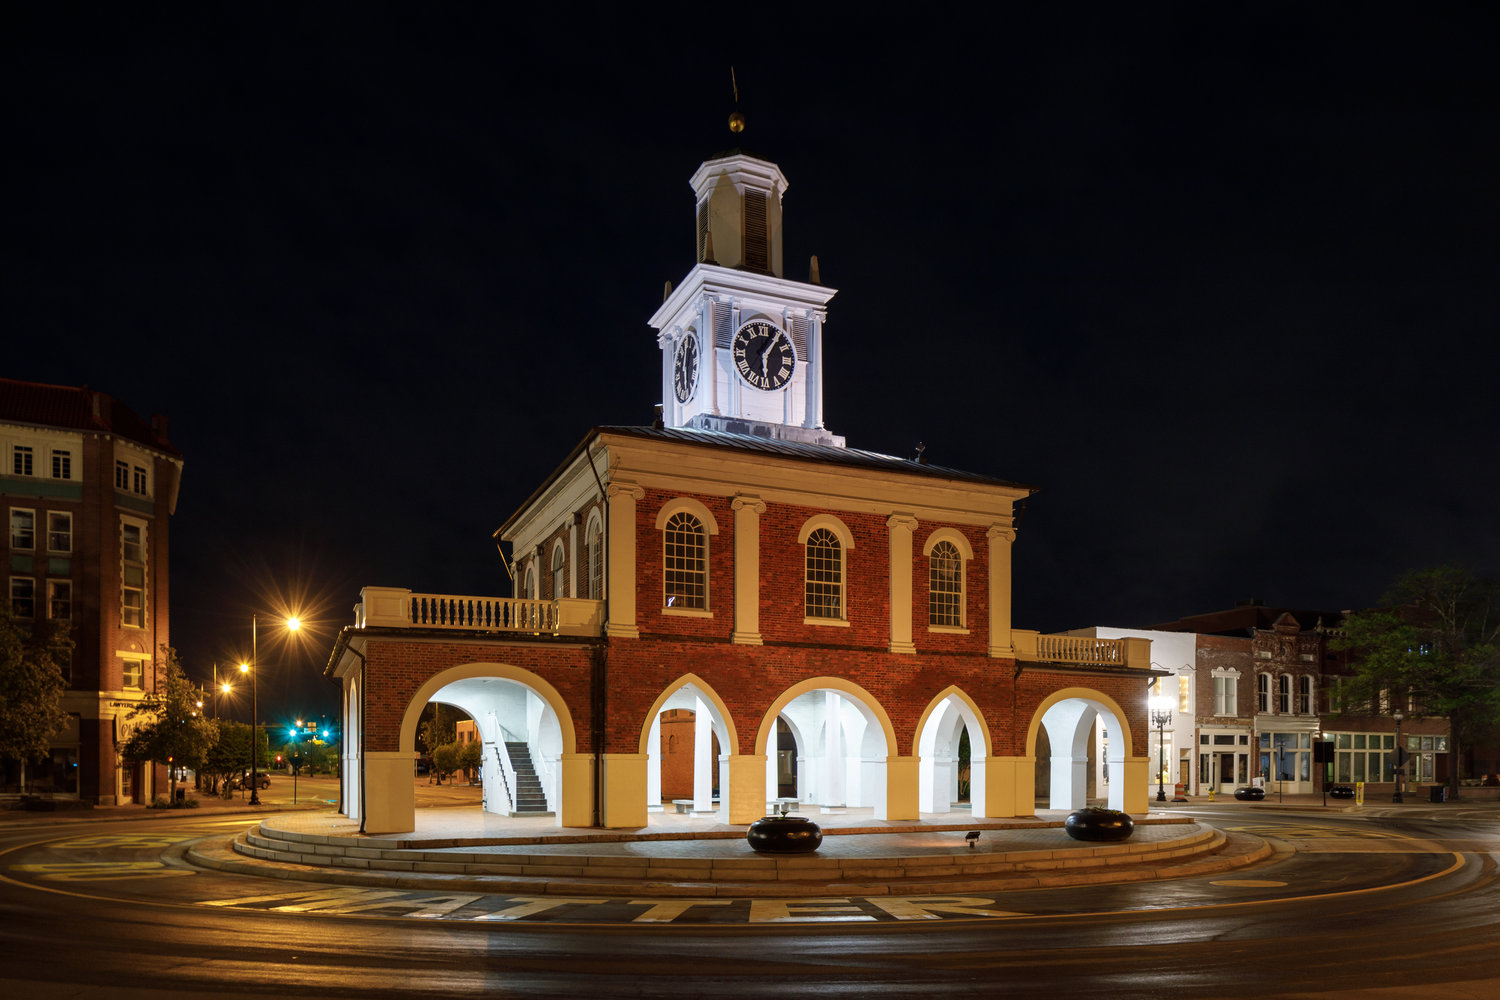 The protective fencing around the Fayetteville Market House was removed early Thursday. The fencing went up following an arson attempt during a protest on May 30, 2020.